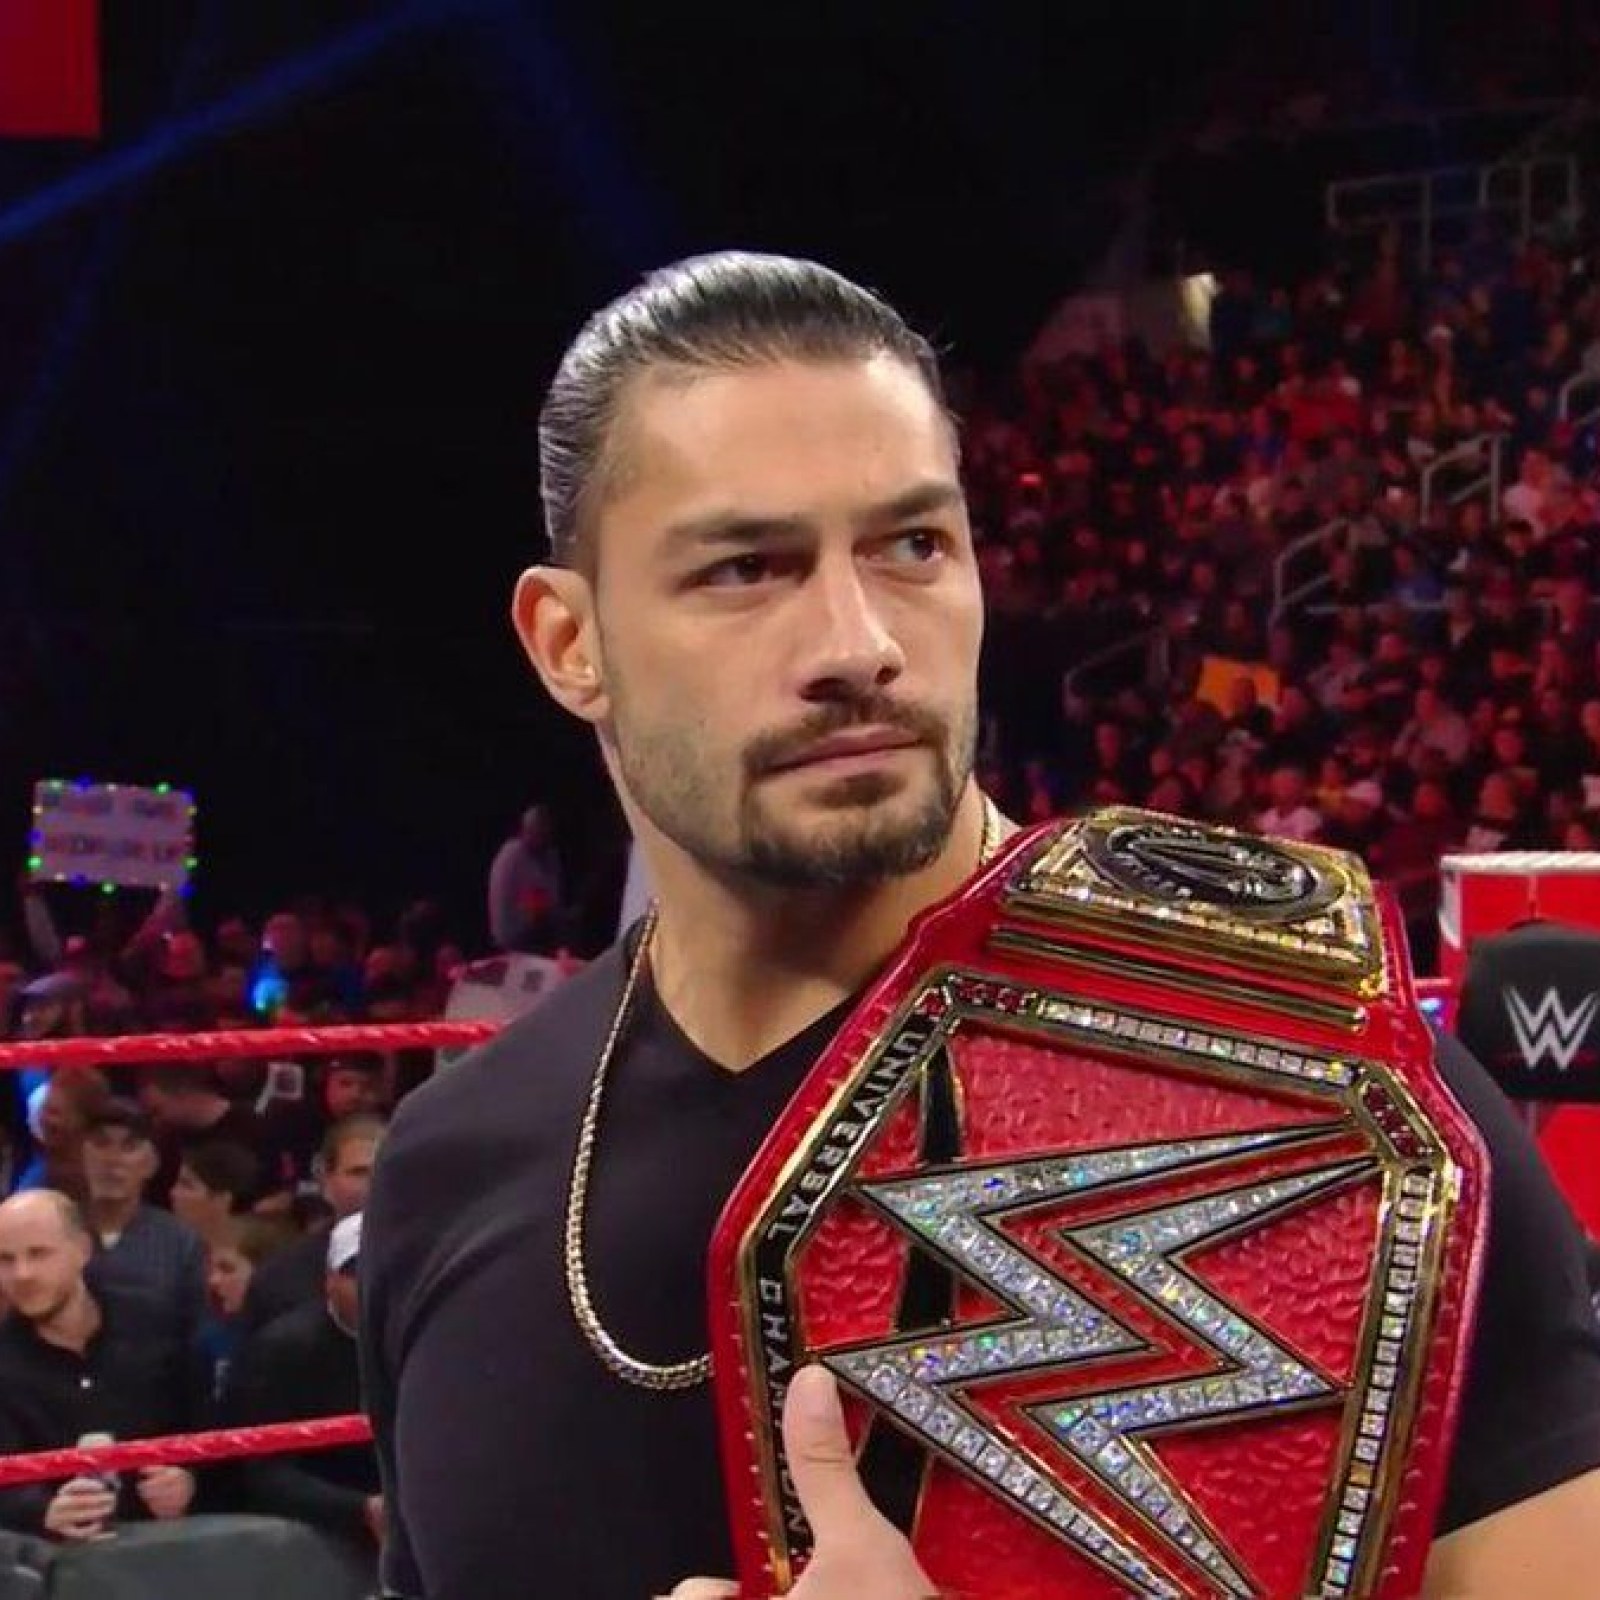 Wwe S Roman Reigns Returns To Monday Night Raw To Give Update On